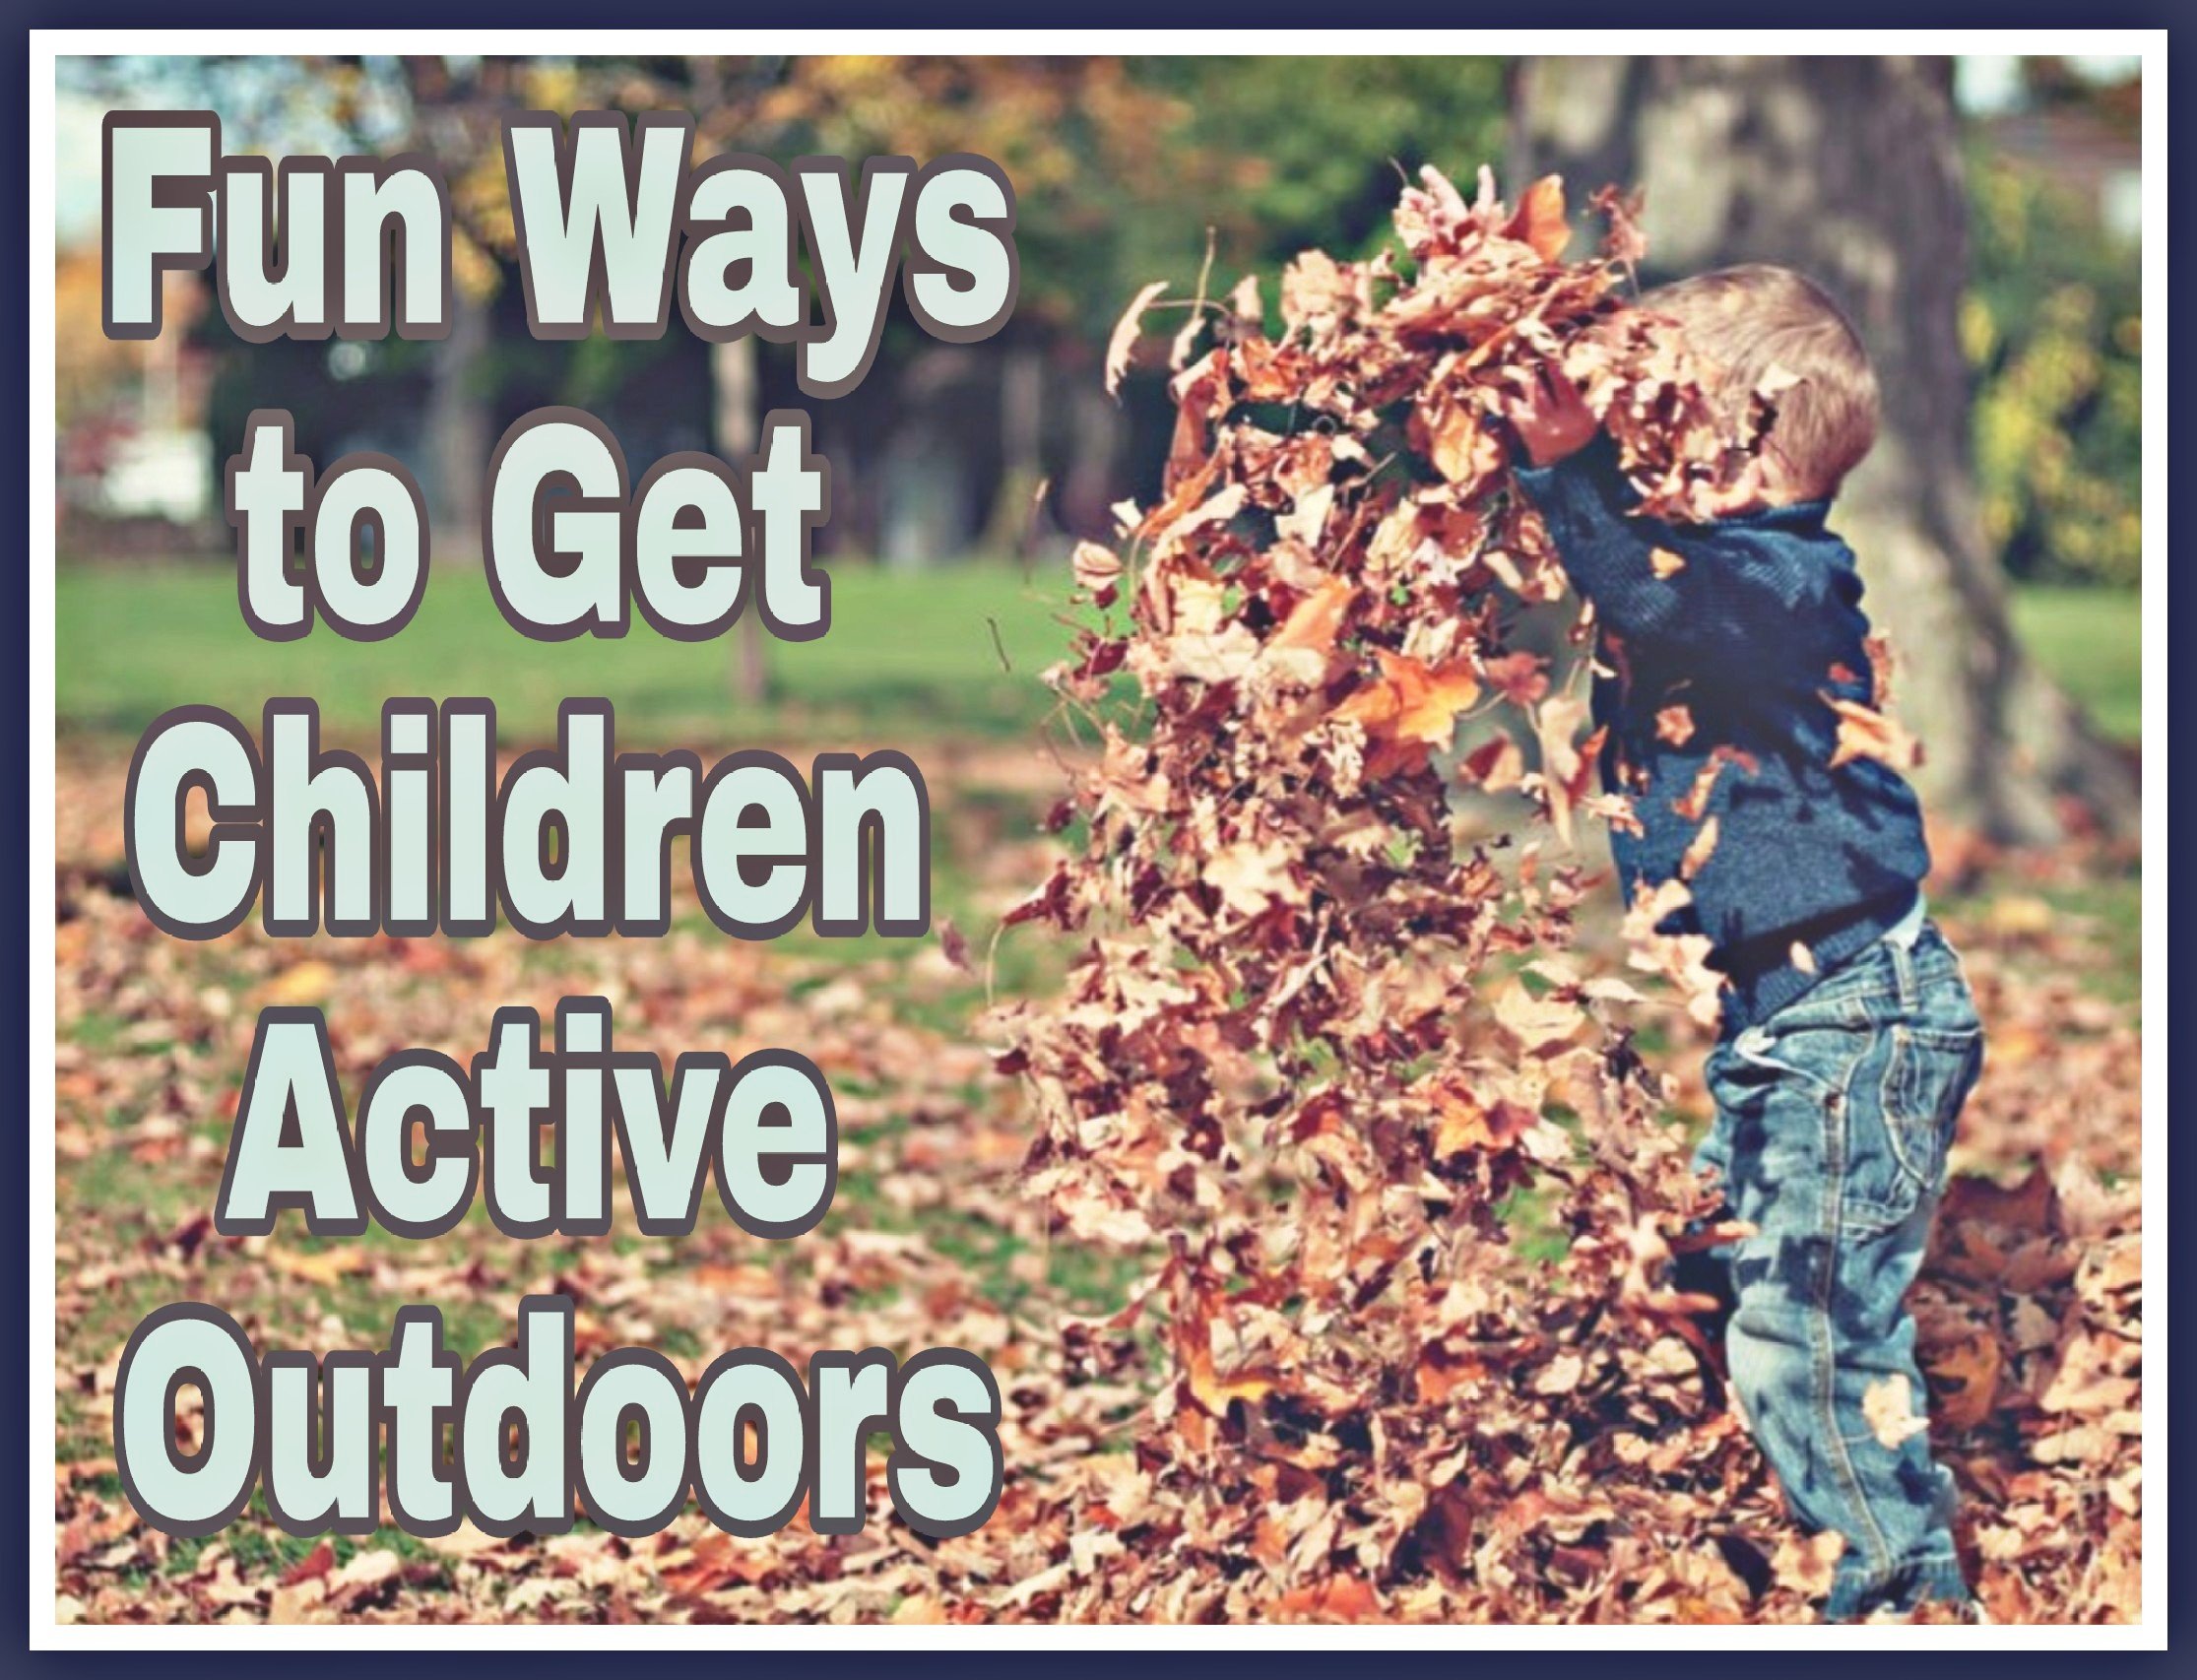  Fun Ways to Get Children Active Outdoors title with image of child throwing leaves